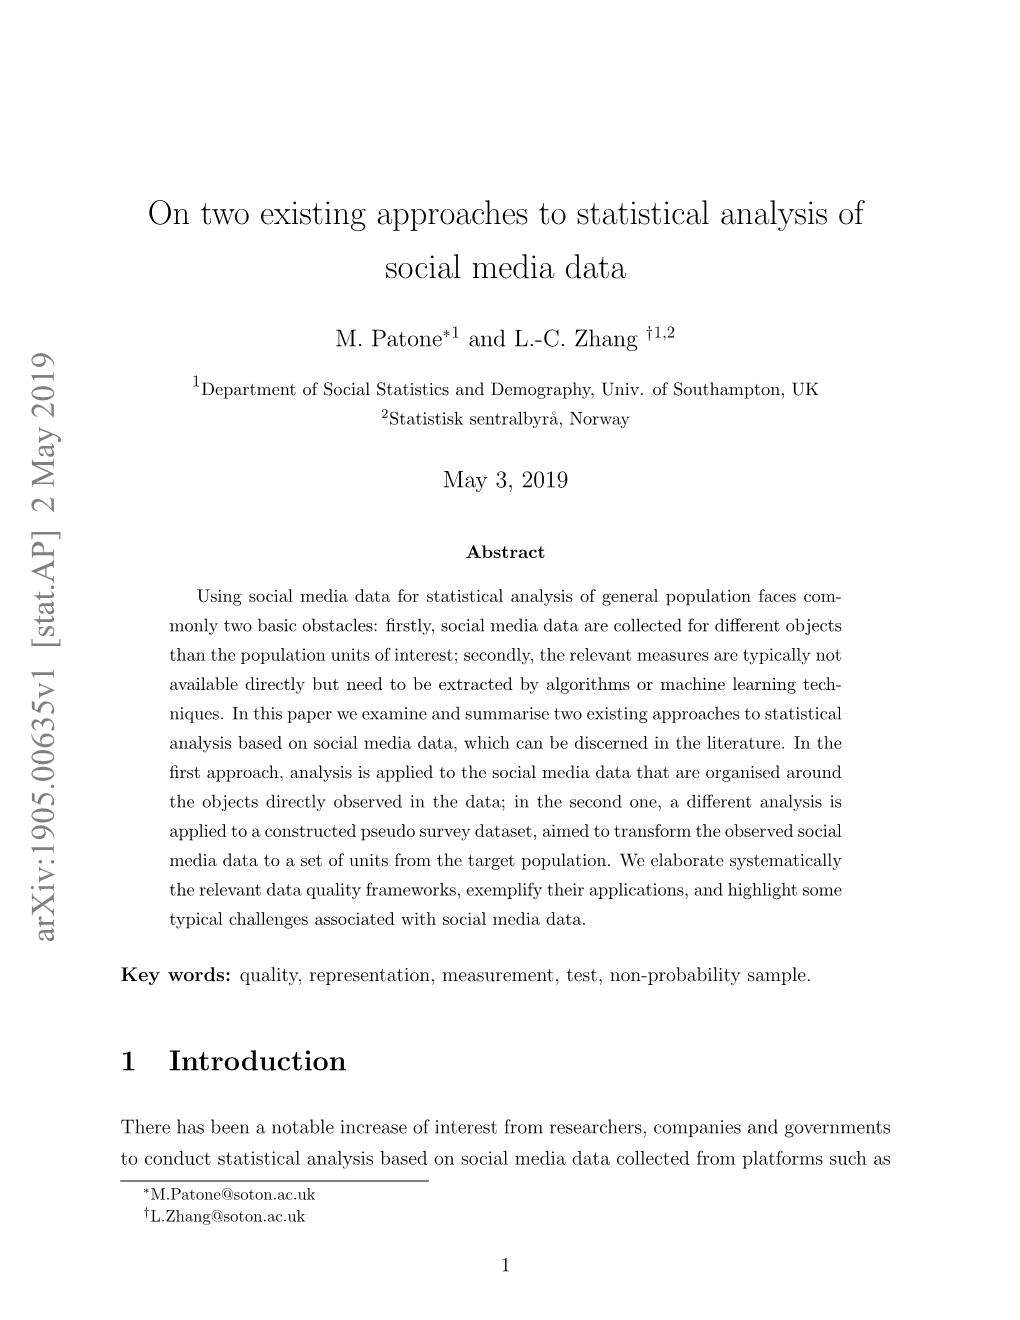 On Two Existing Approaches to Statistical Analysis of Social Media Data